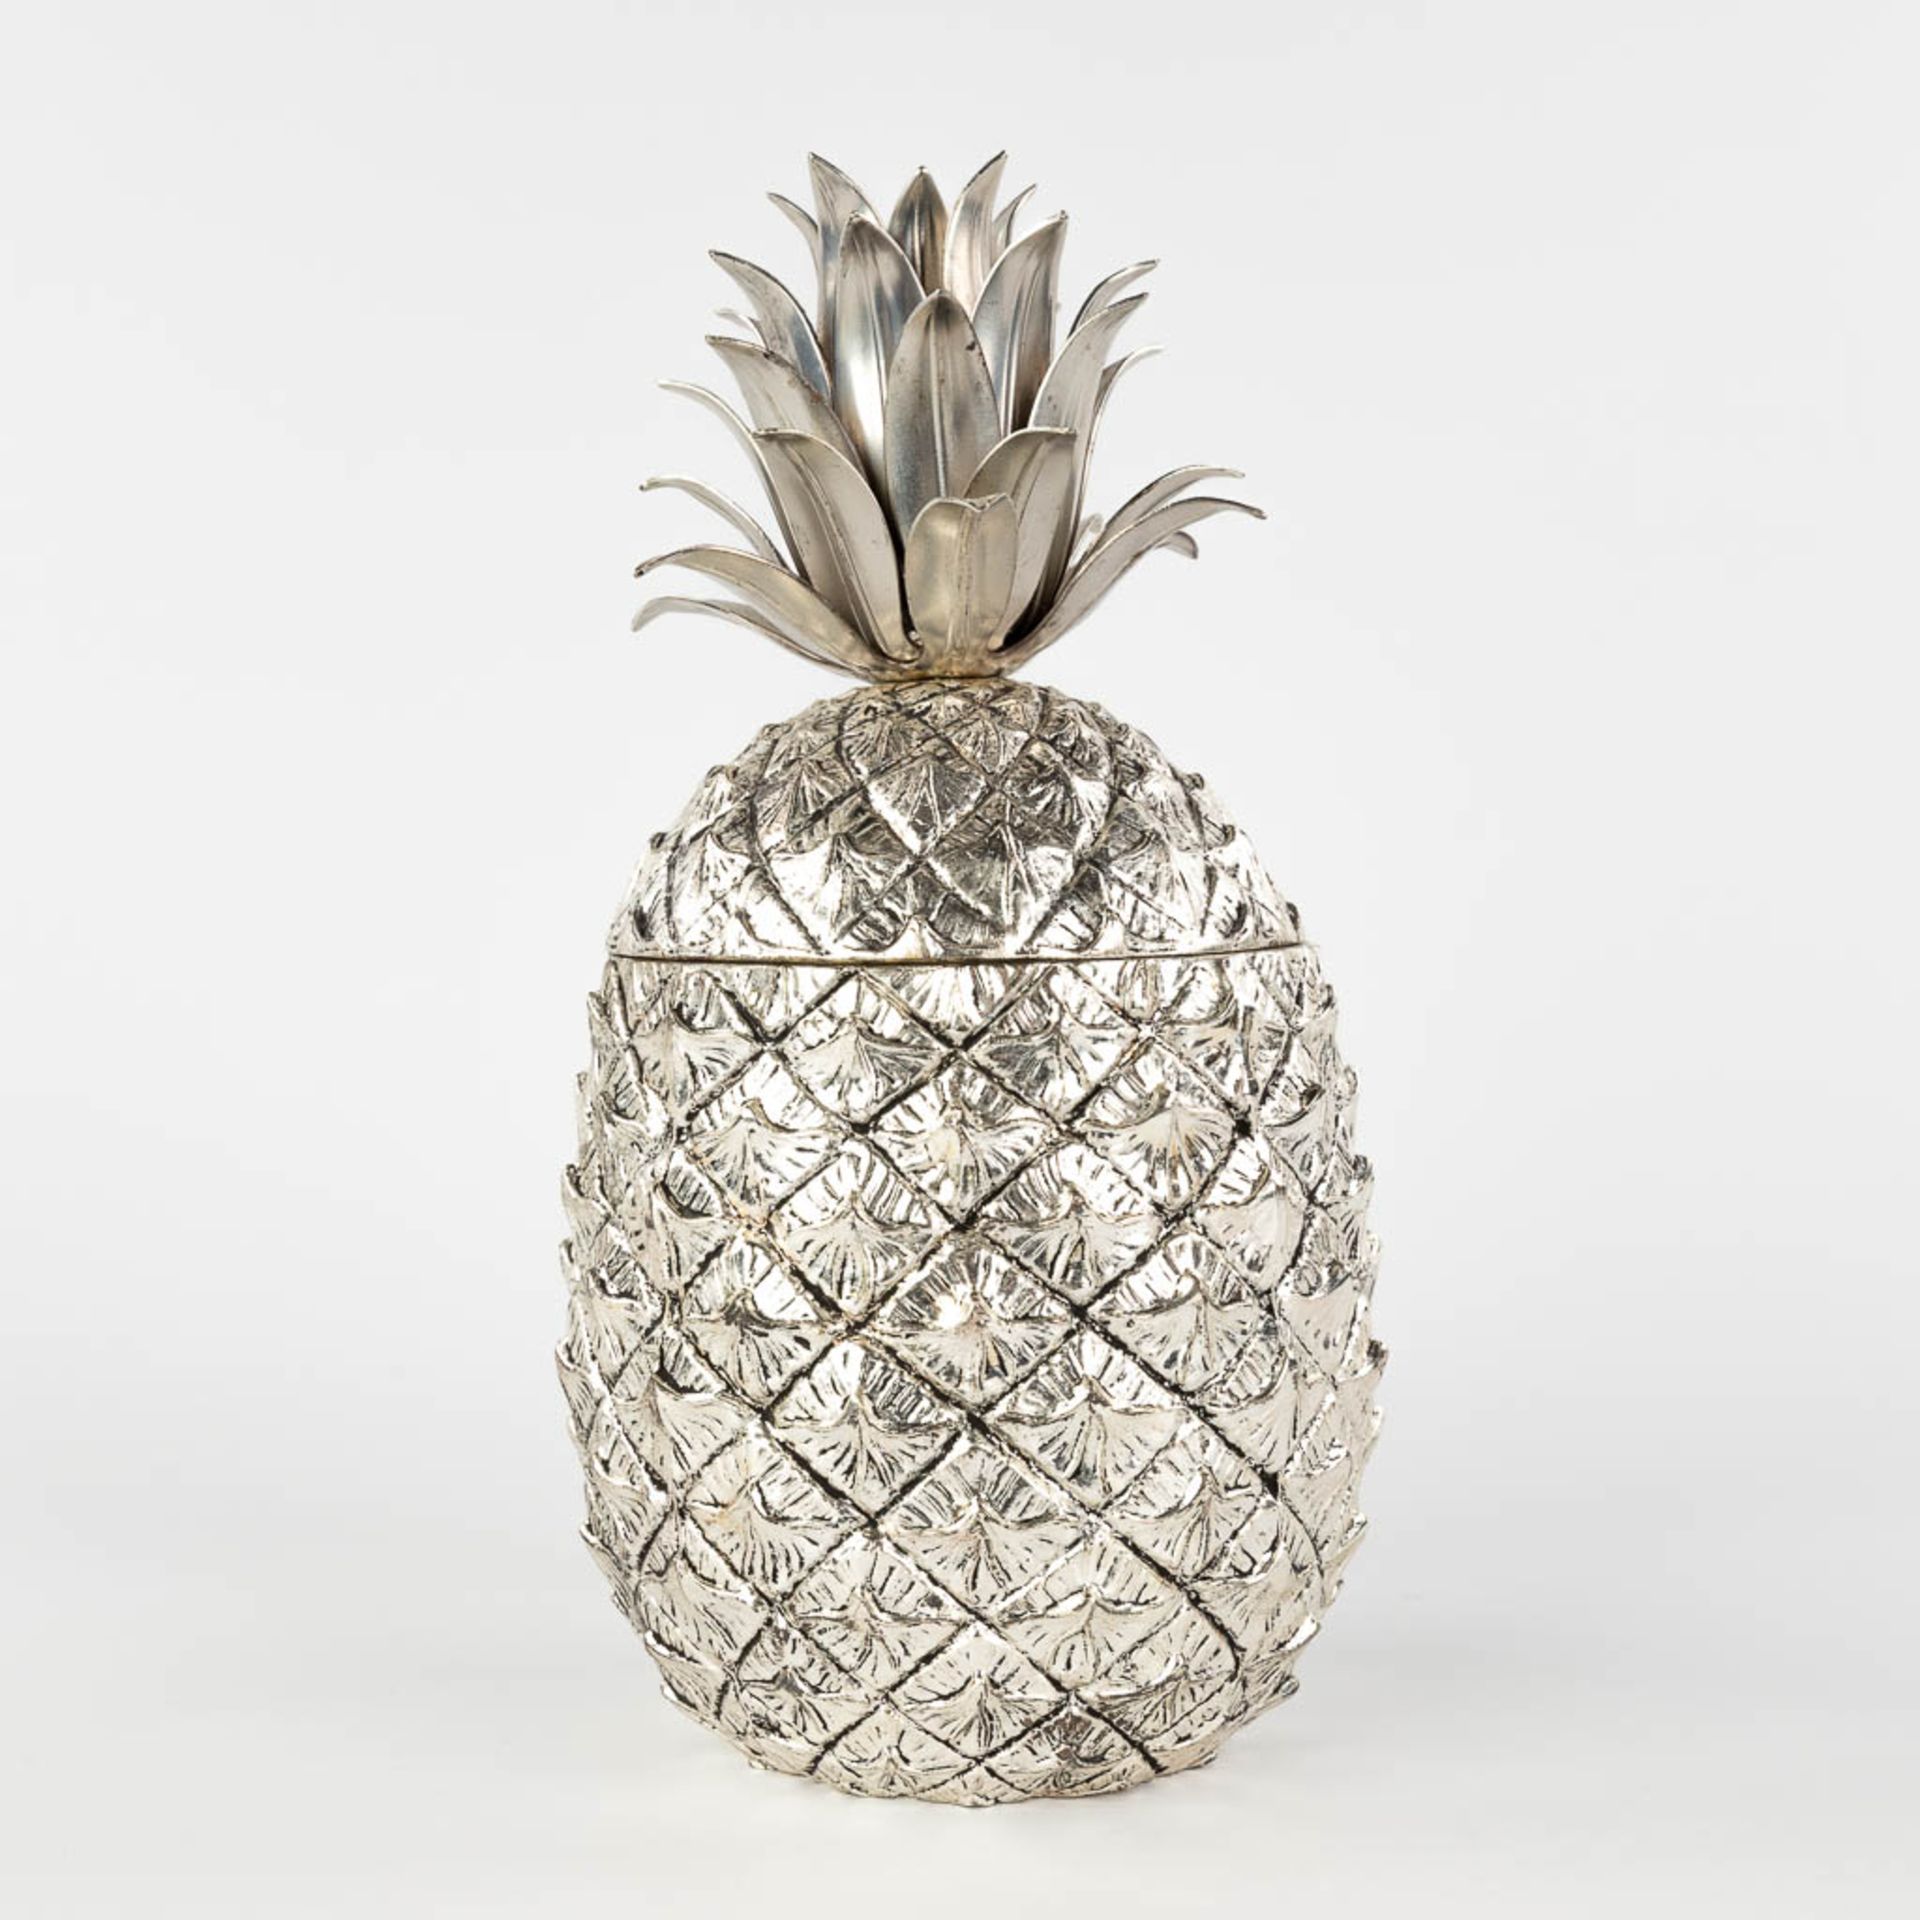 Mauro MANETTI (1946) 'Pineapple' an ice pail. (H:27 x D:13 cm) - Image 5 of 10